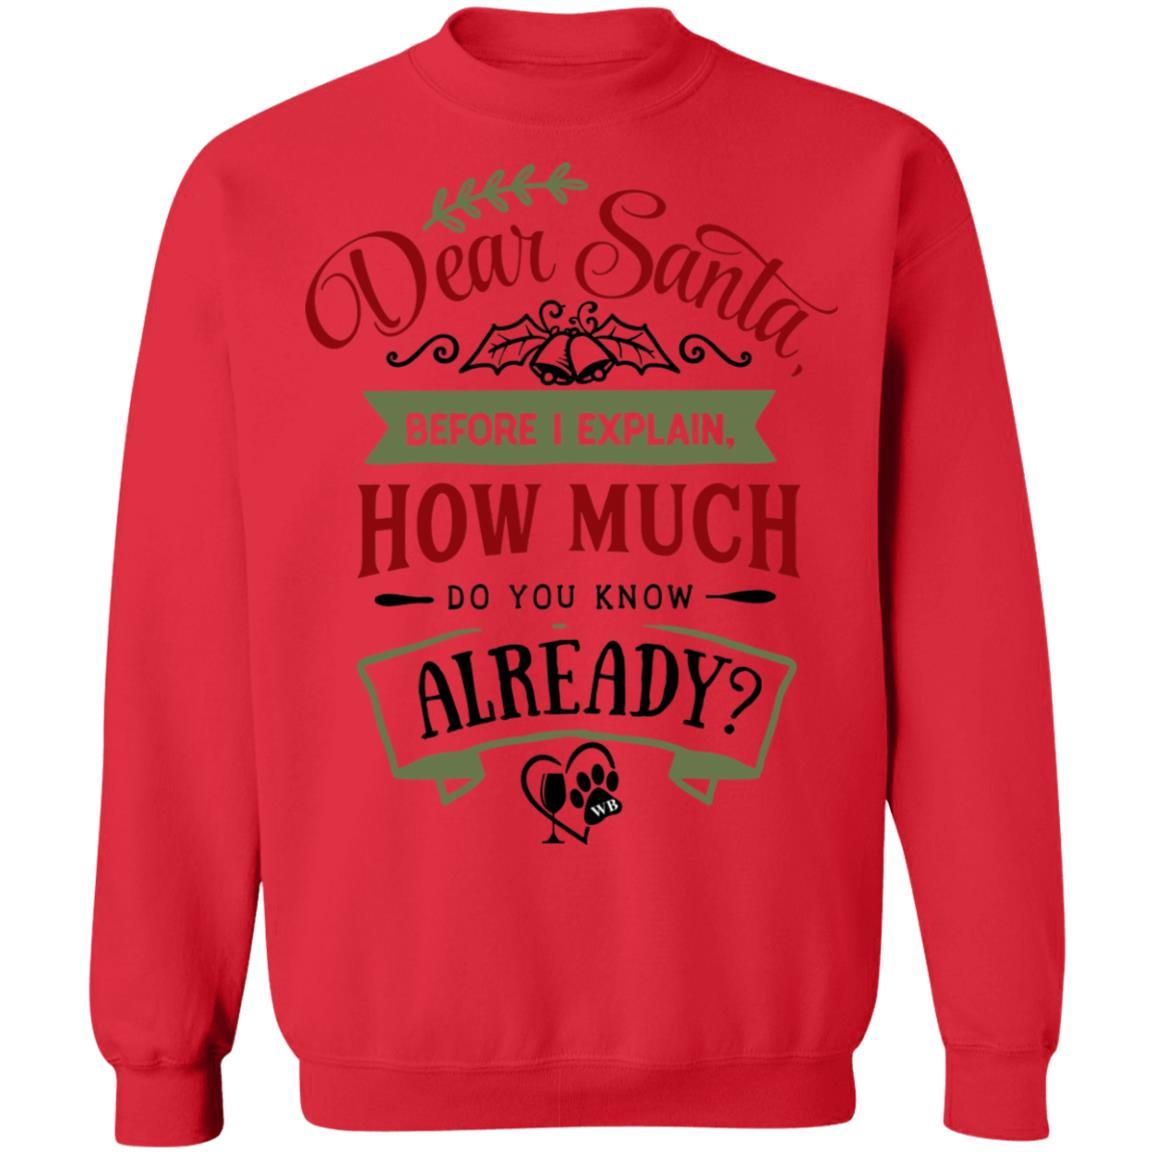 Sweatshirts Red / S WineyBitches.Co "Dear Santa, Before I Explain, How Much Do You Already Know" Crewneck Pullover Sweatshirt  8 oz. WineyBitchesCo